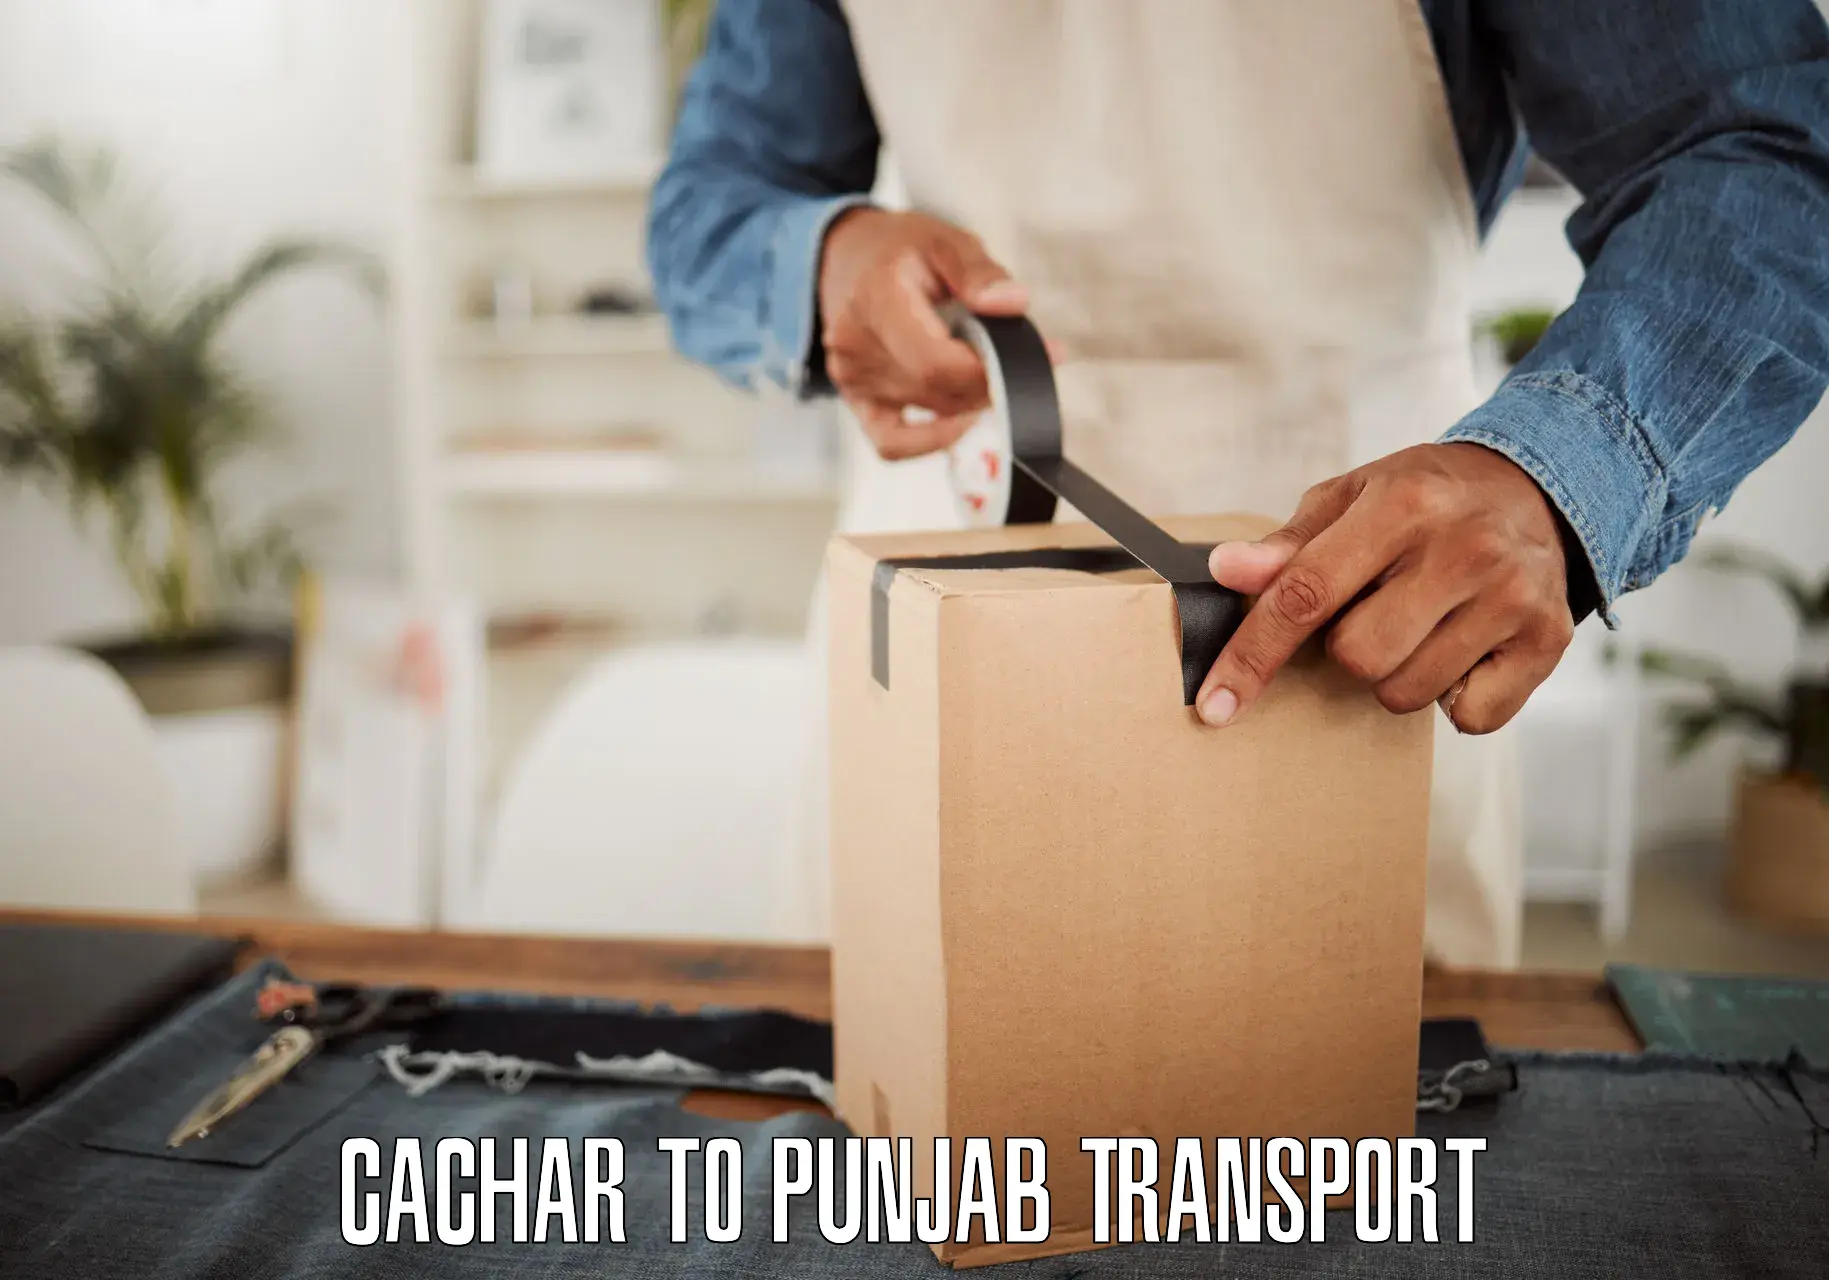 Commercial transport service Cachar to Anandpur Sahib